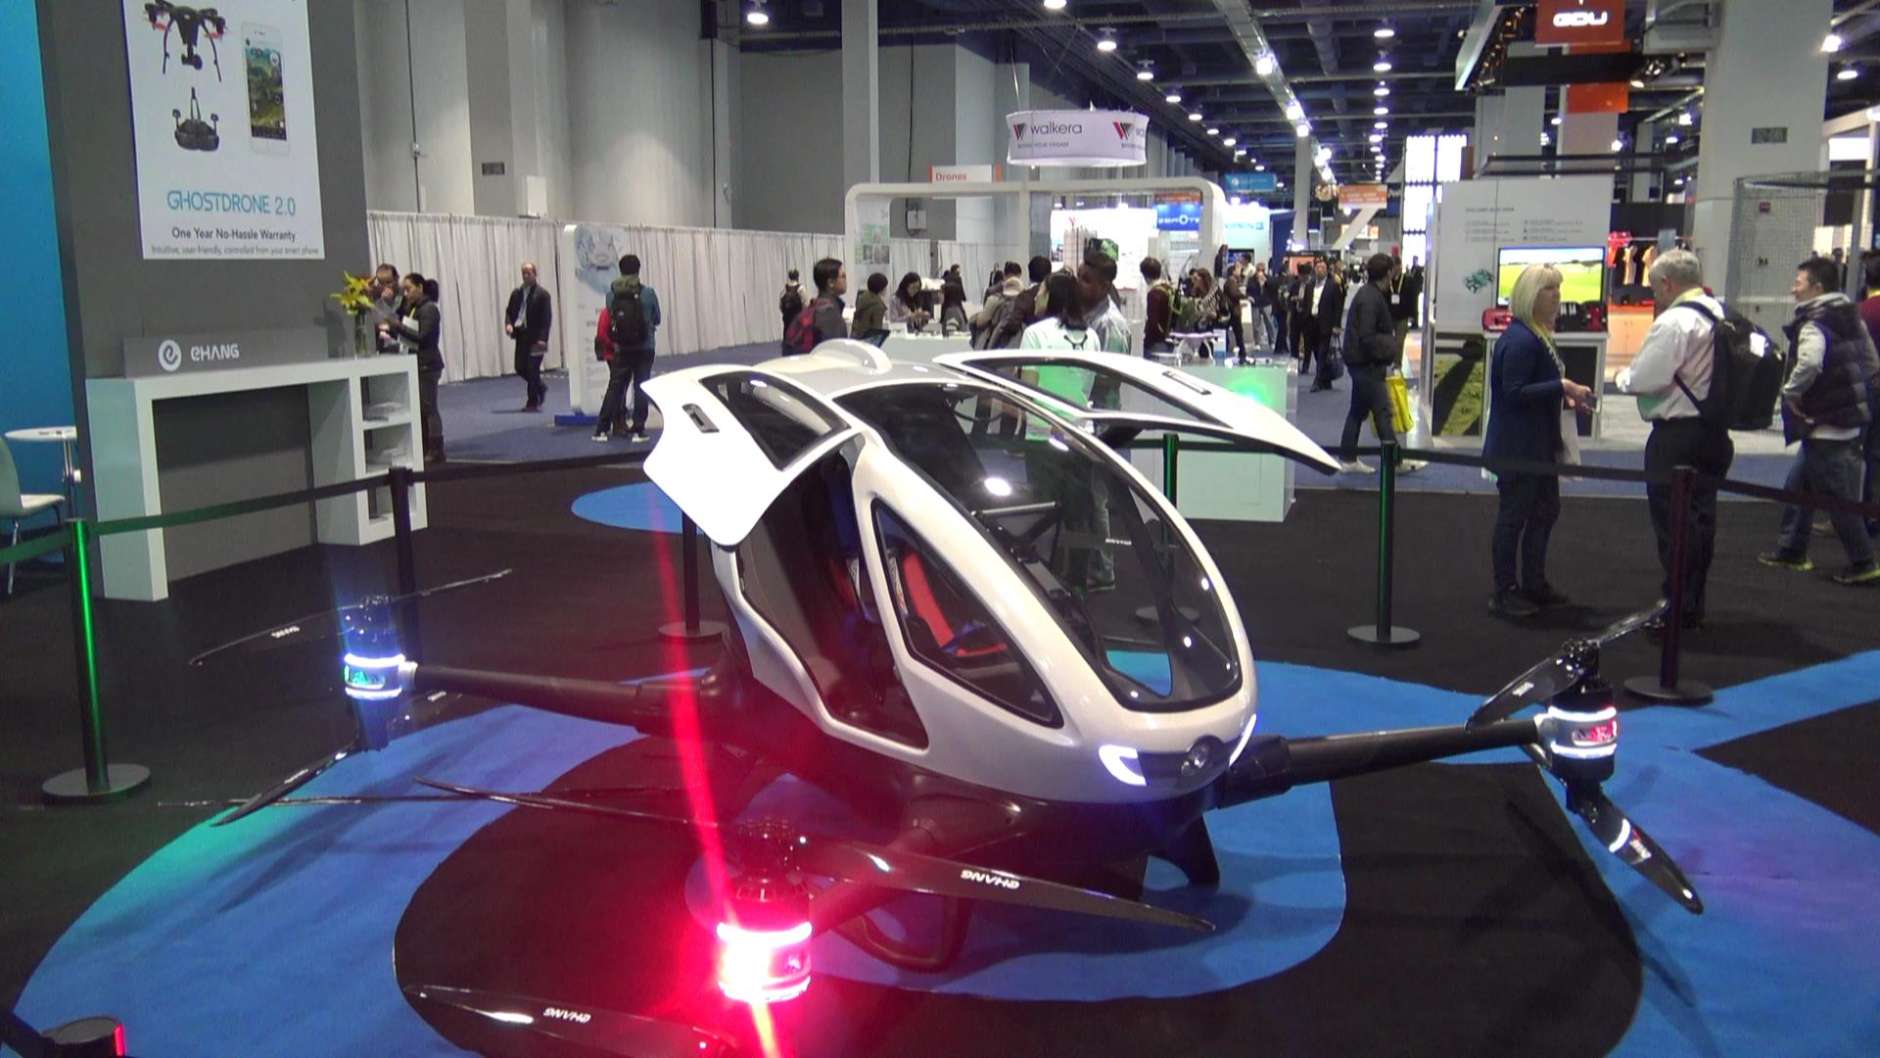 A startup from France called REVA2, which is designing a fleet of driverless vehicles that can be accessed by smartphone, tablet or PC, is also experimenting with transport that takes to the skies. (WTOP/Kenny Fried)